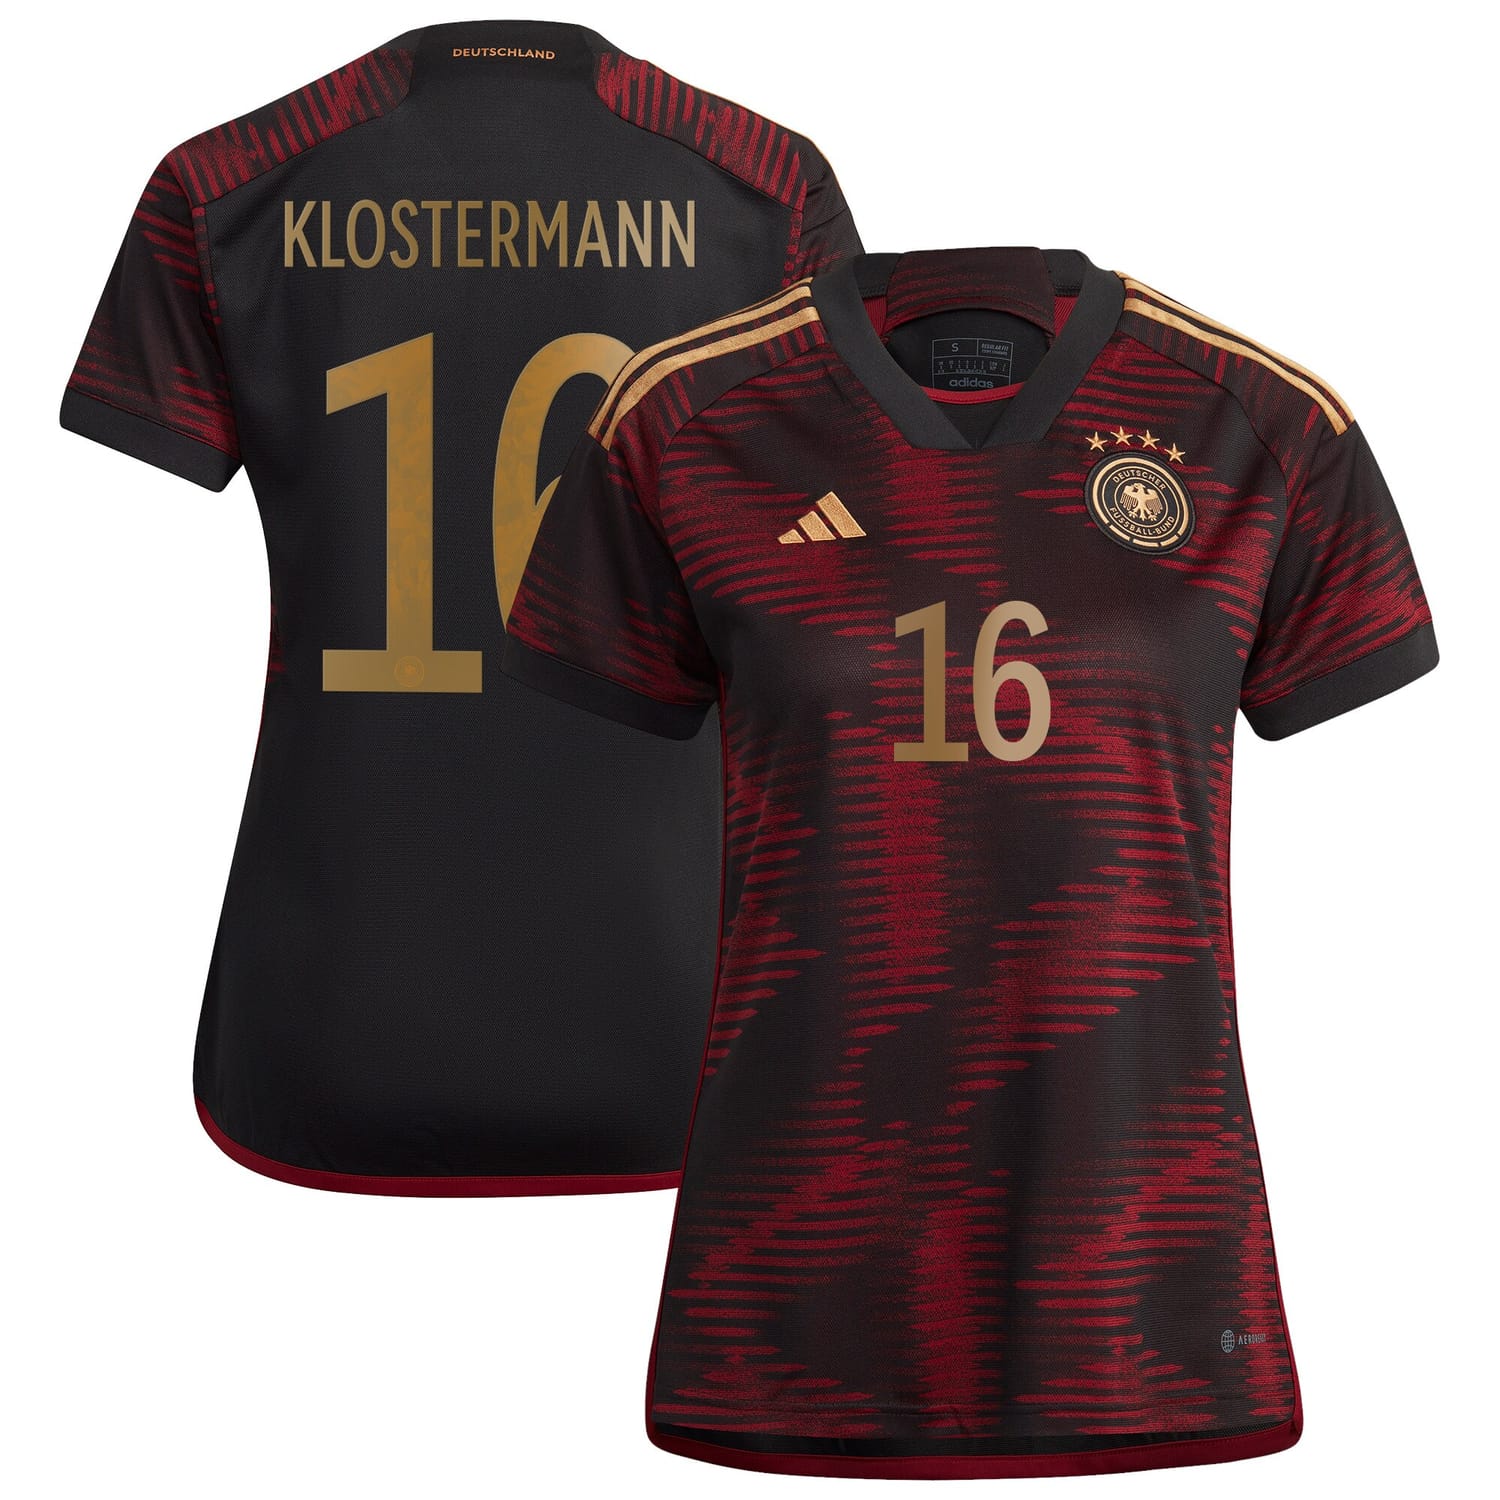 Germany National Team Away Jersey Shirt player Lukas Klostermann 16 printing for Women